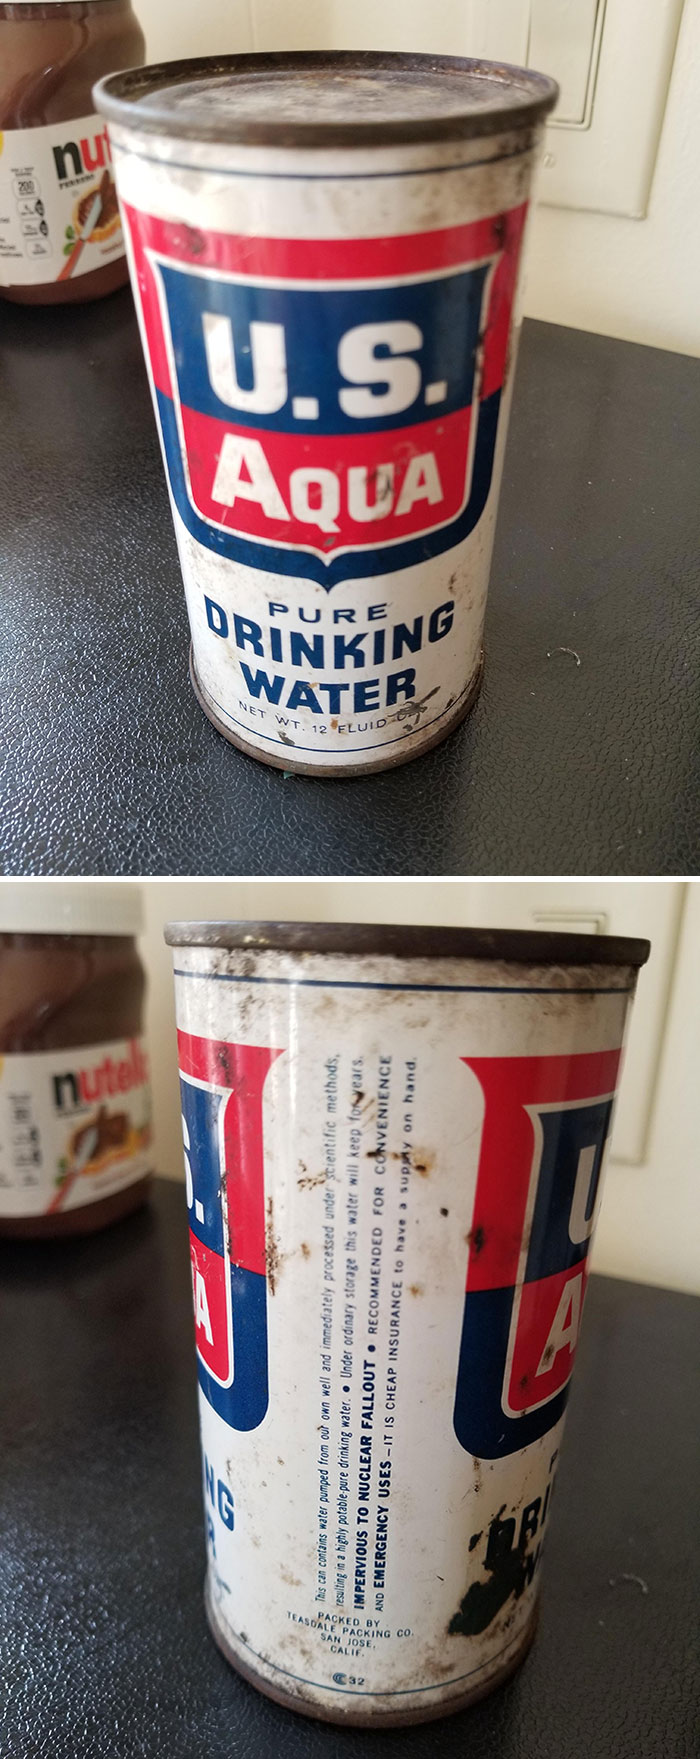 Possibly Timely Antique Store Find. Unopened 1950s Canned Water For A Nuclear Shelter